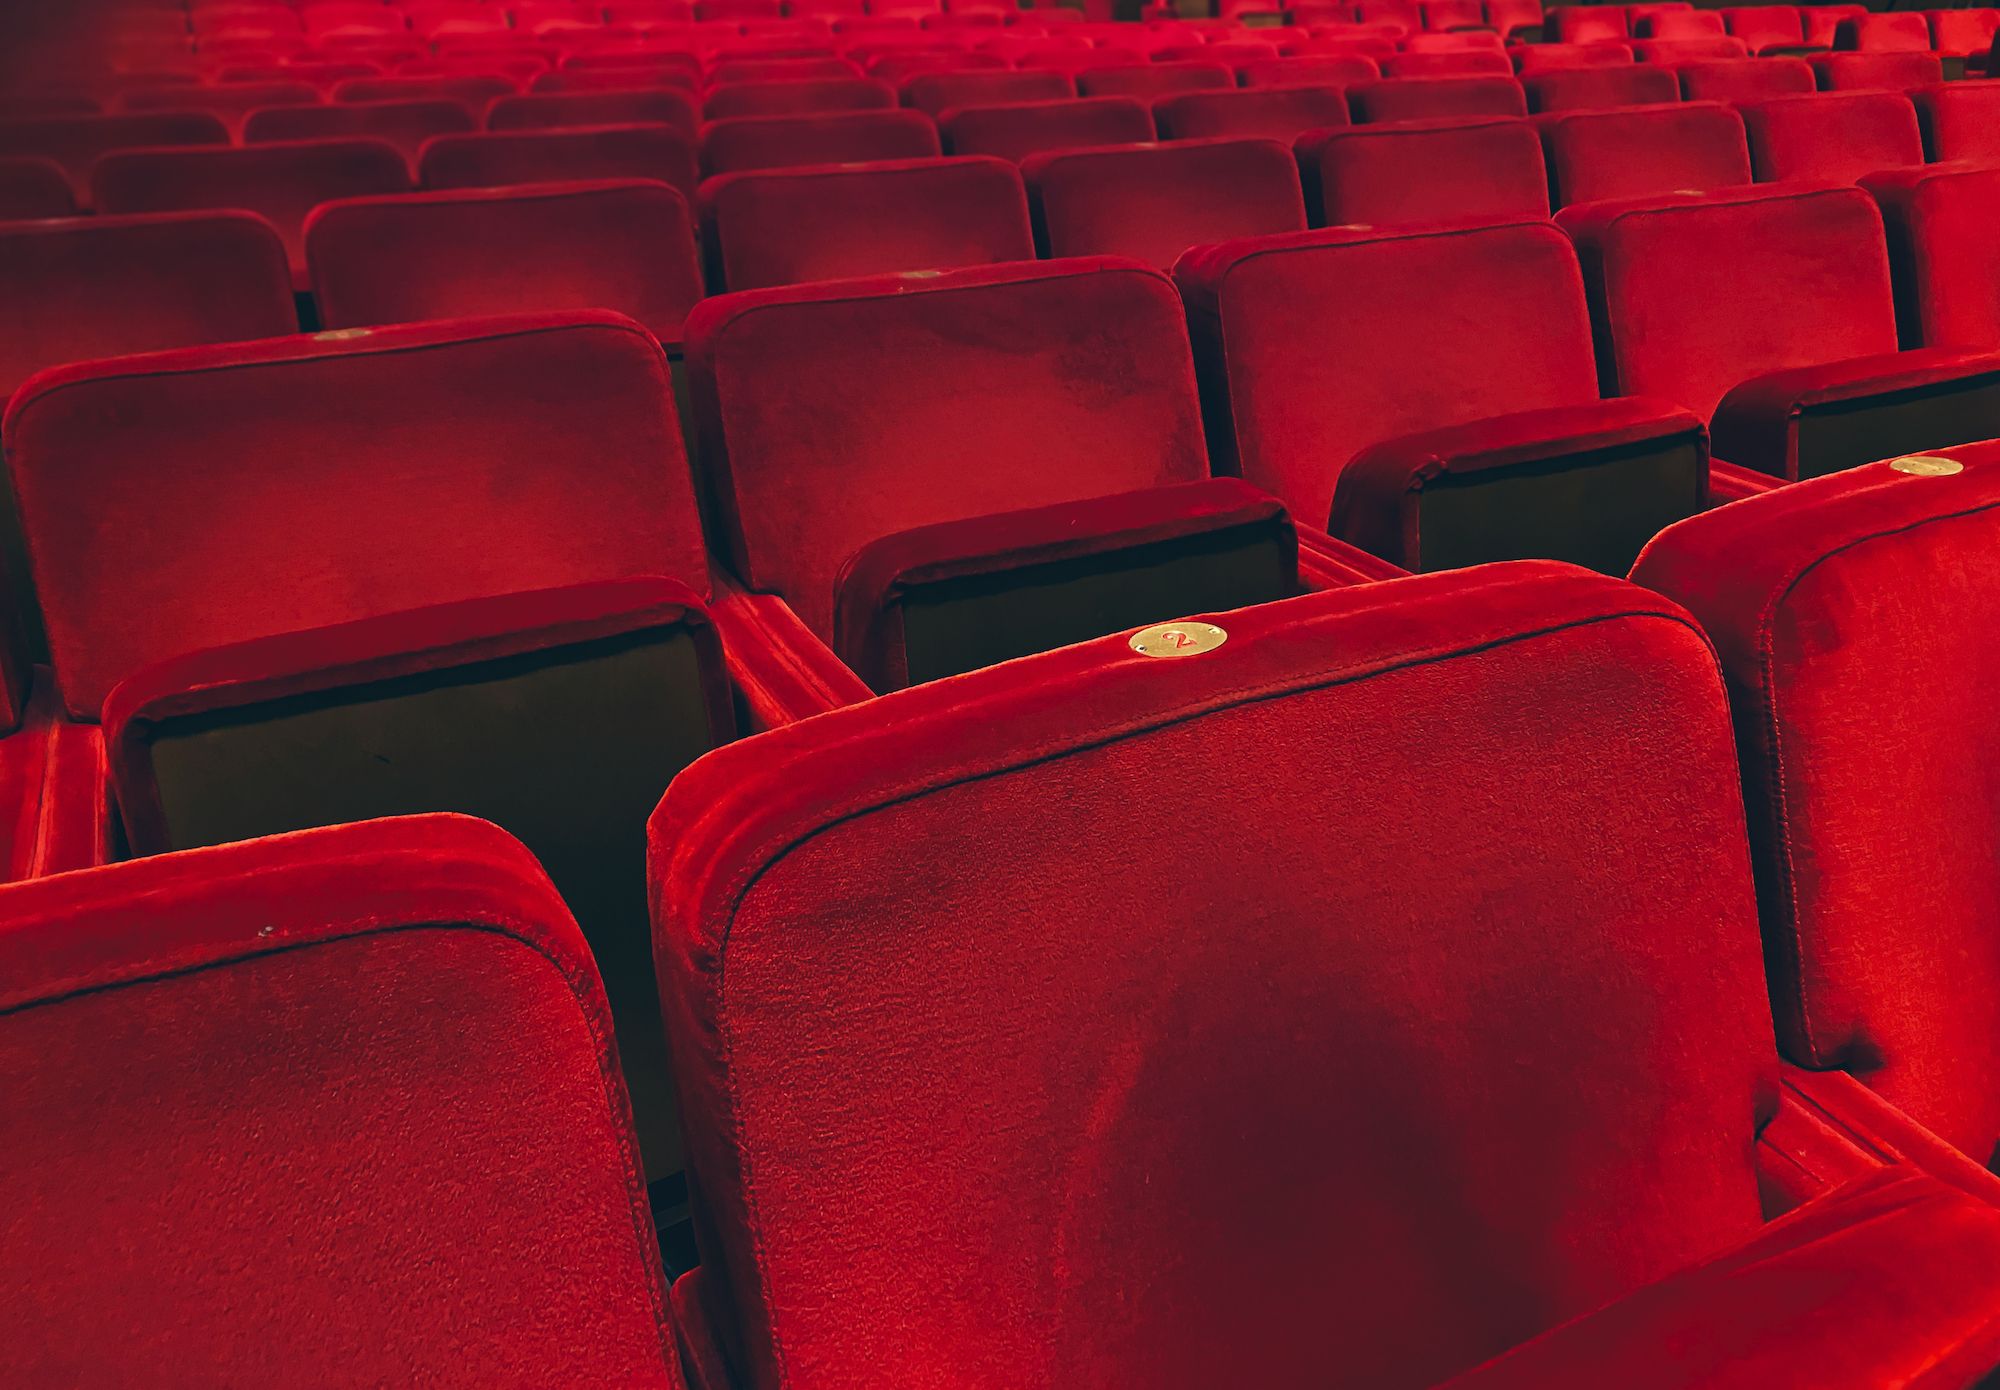 empty red velvet armchairs illuminated inside a concert hall